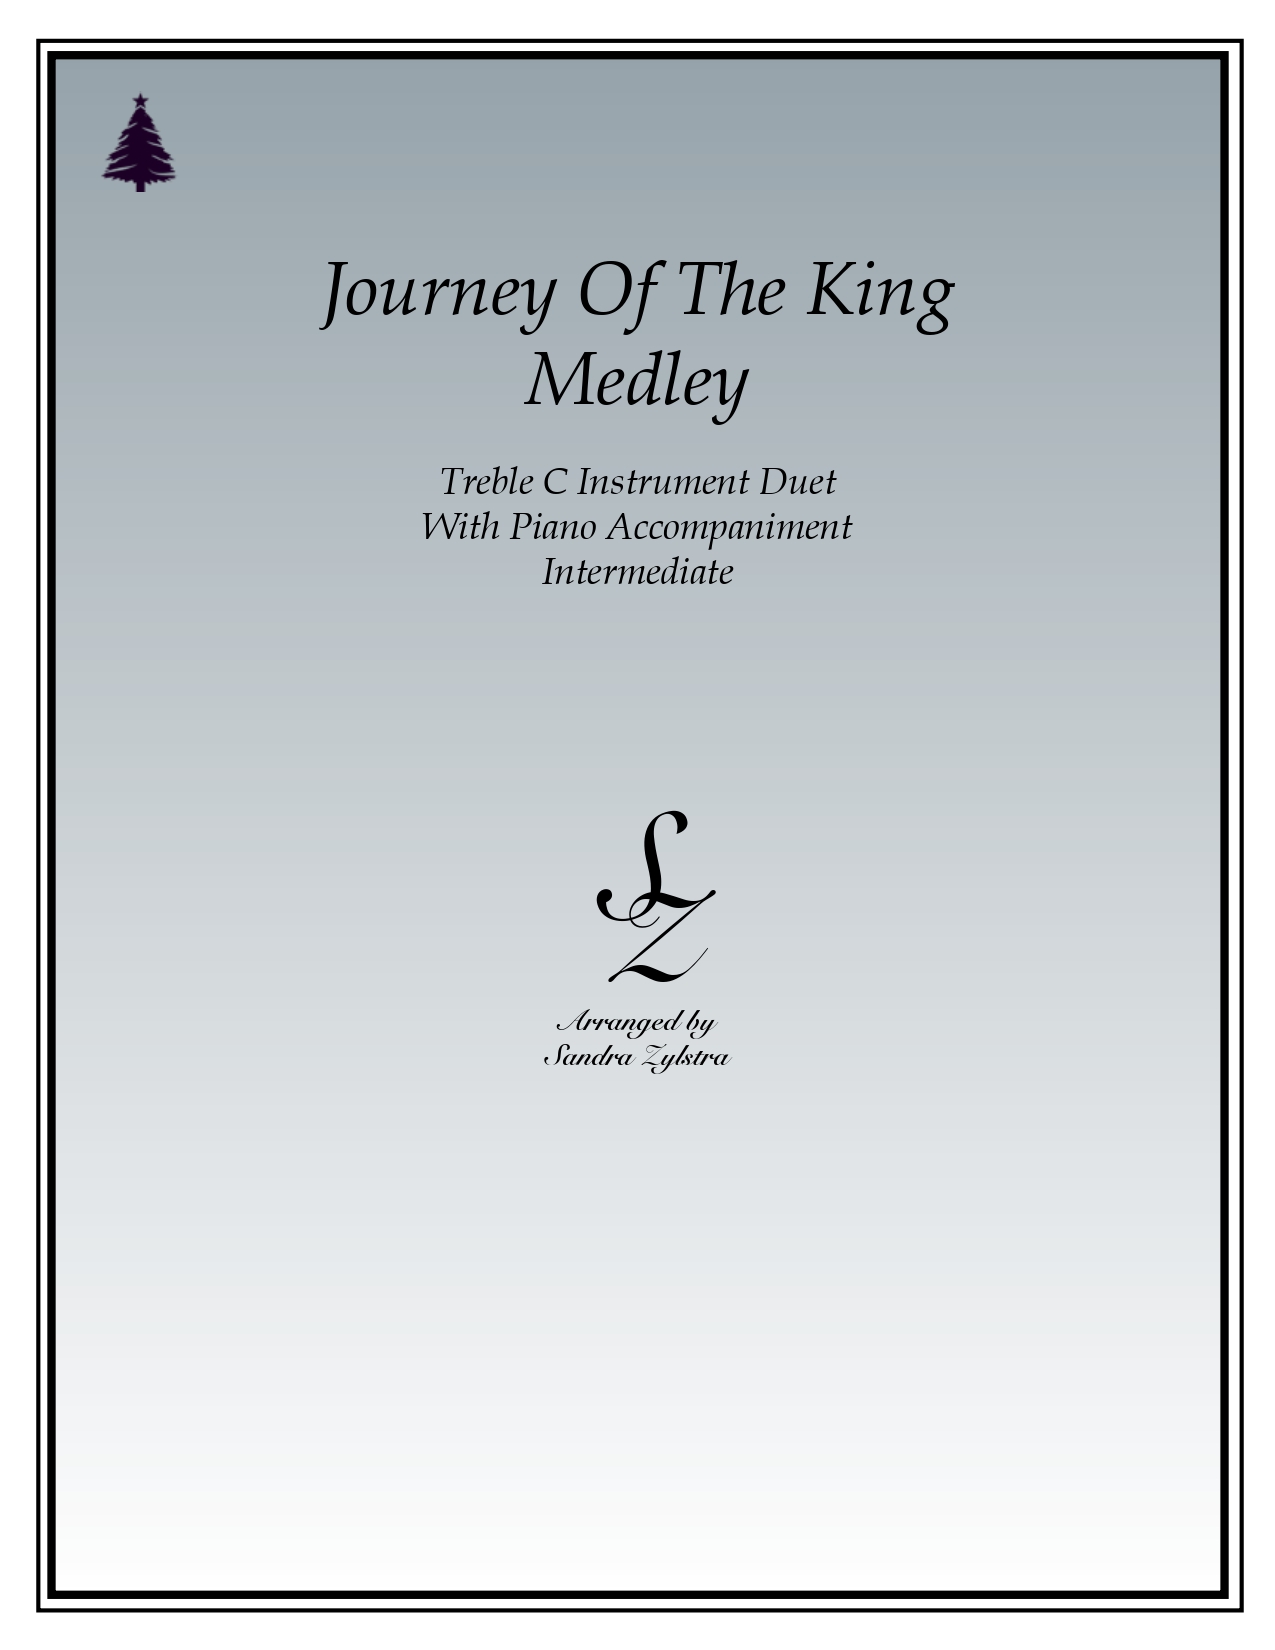 Journey Of The King Medley treble C instrument duet parts cover page 00011